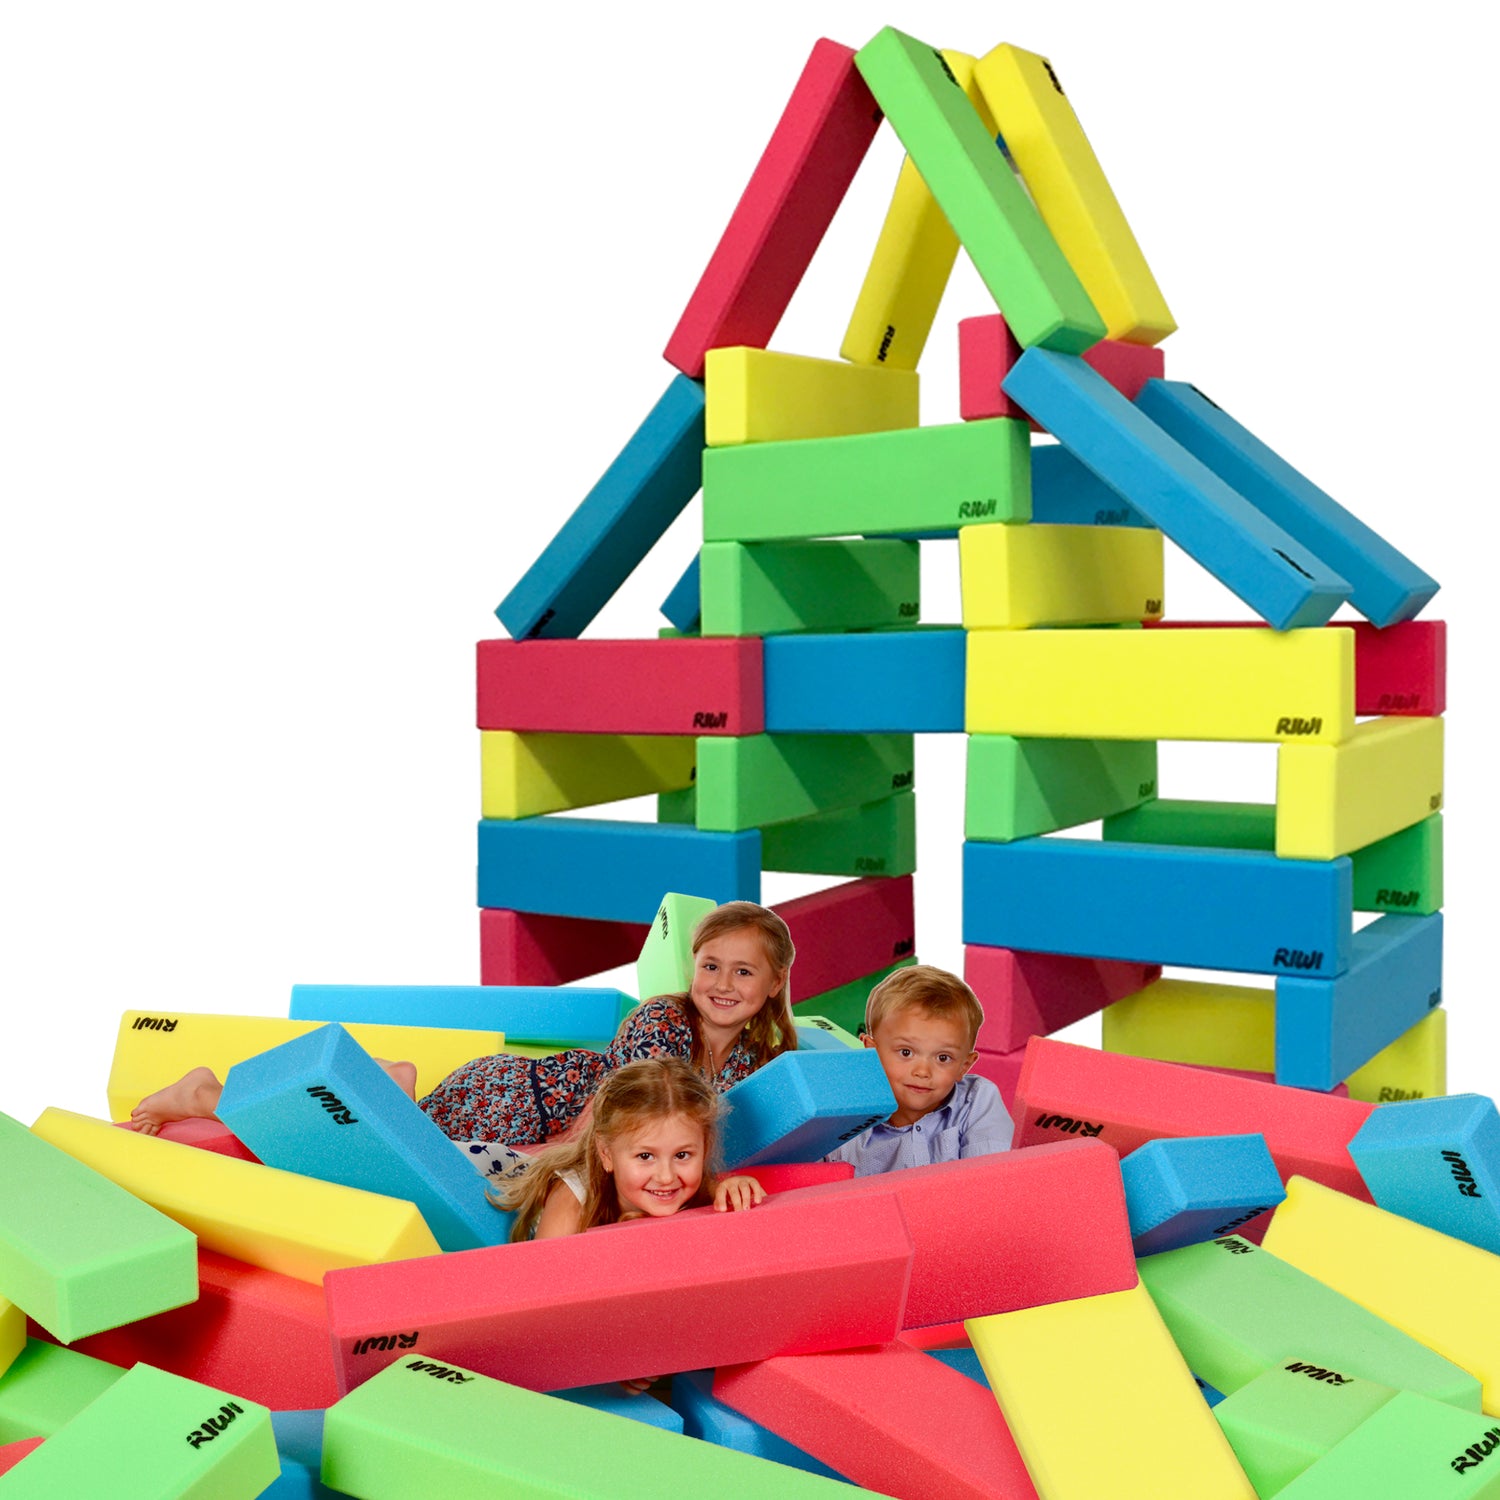 XXL Building blocks tower kids fur colours green red blue yellow creative giant play